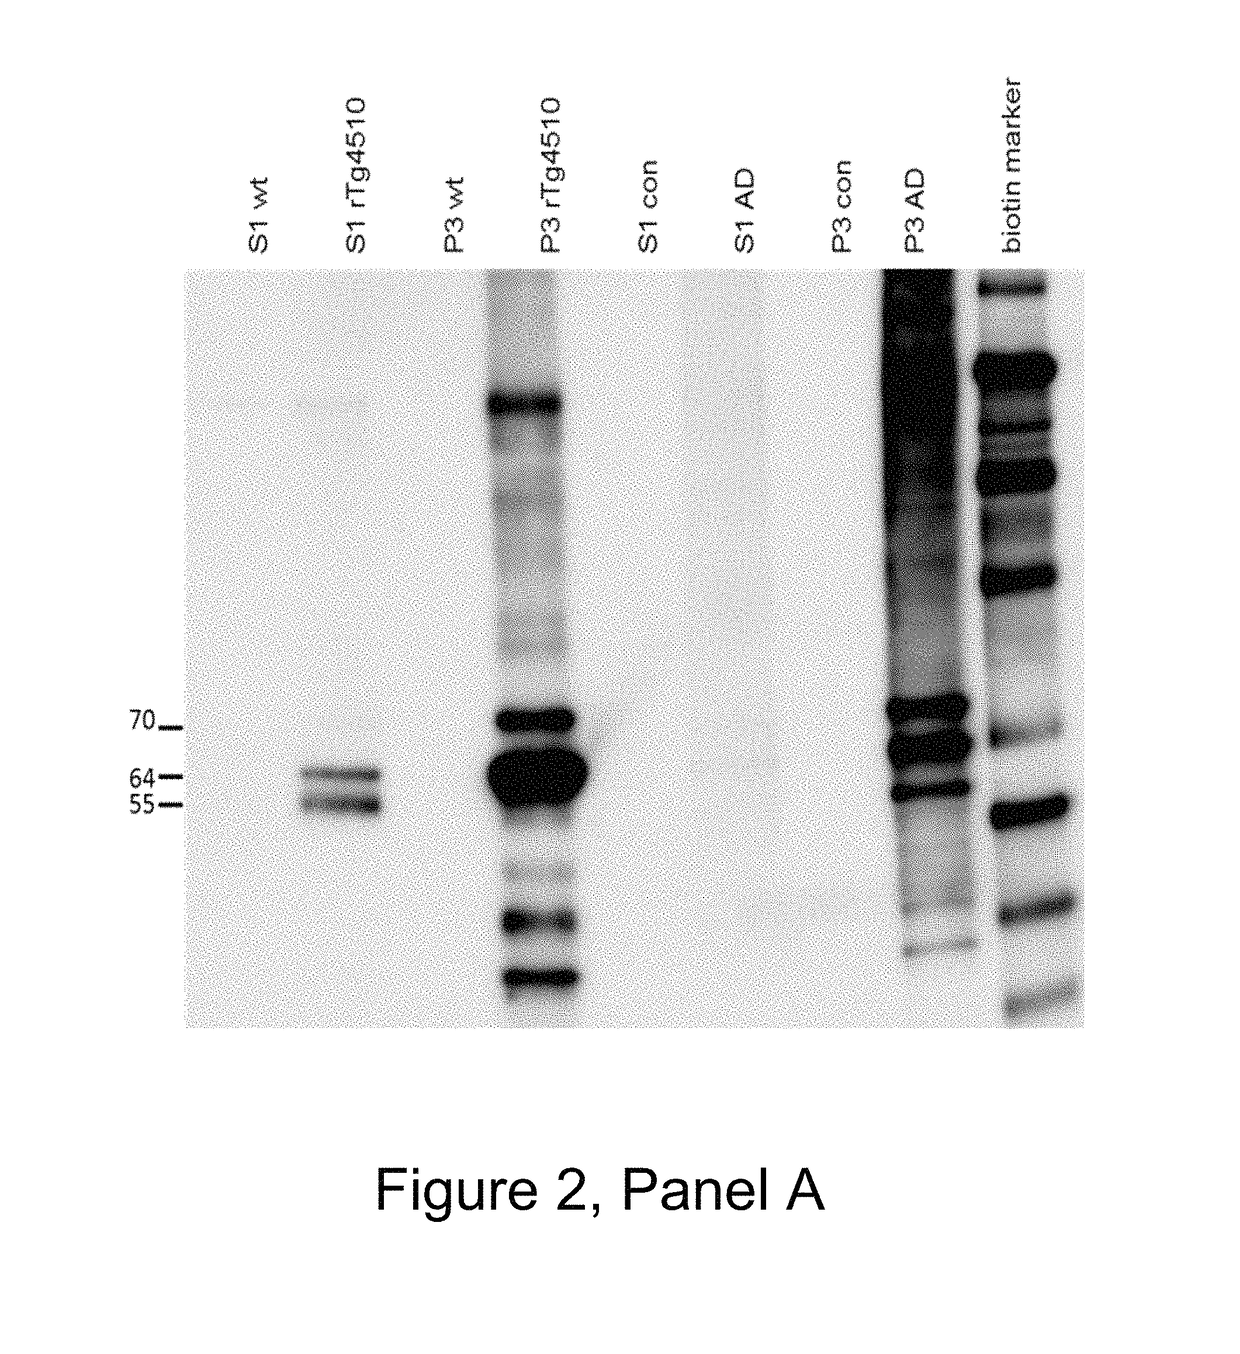 Antibodies specific for hyperphosphorylated tau and methods of use thereof